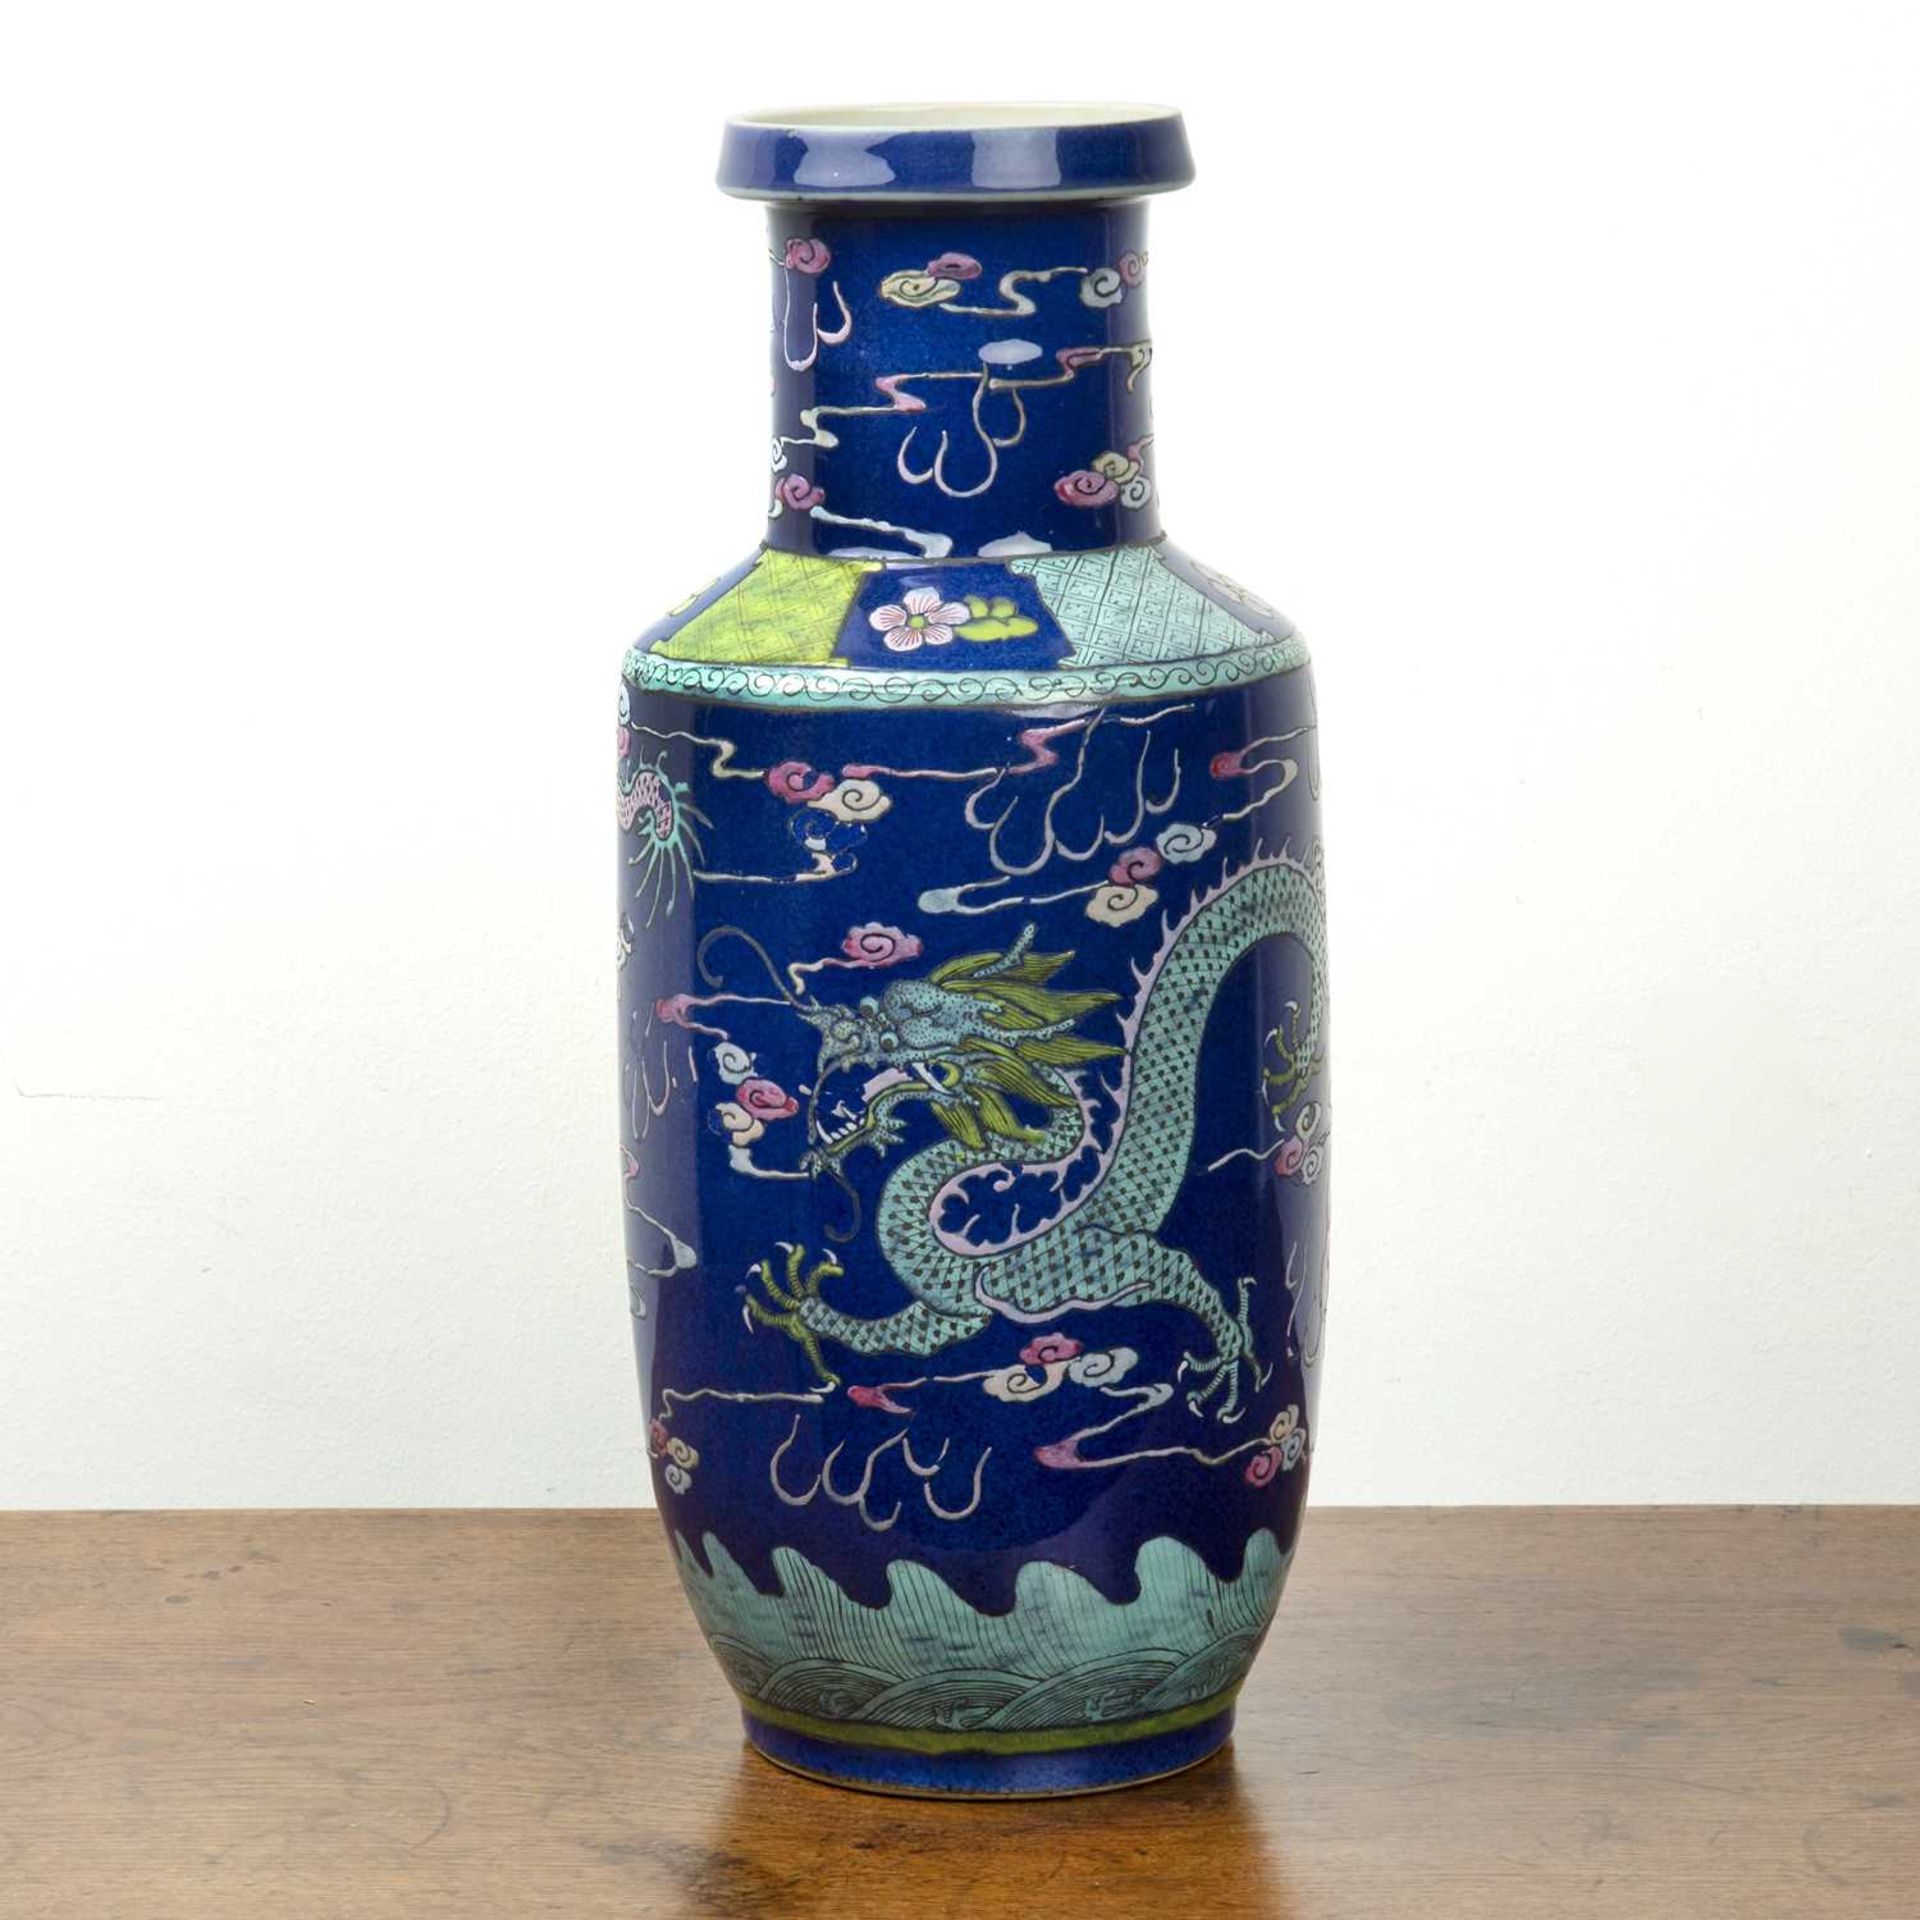 Blue ground rouleau vase Chinese, 19th/20th Century painted in enamels with dragons and flaming